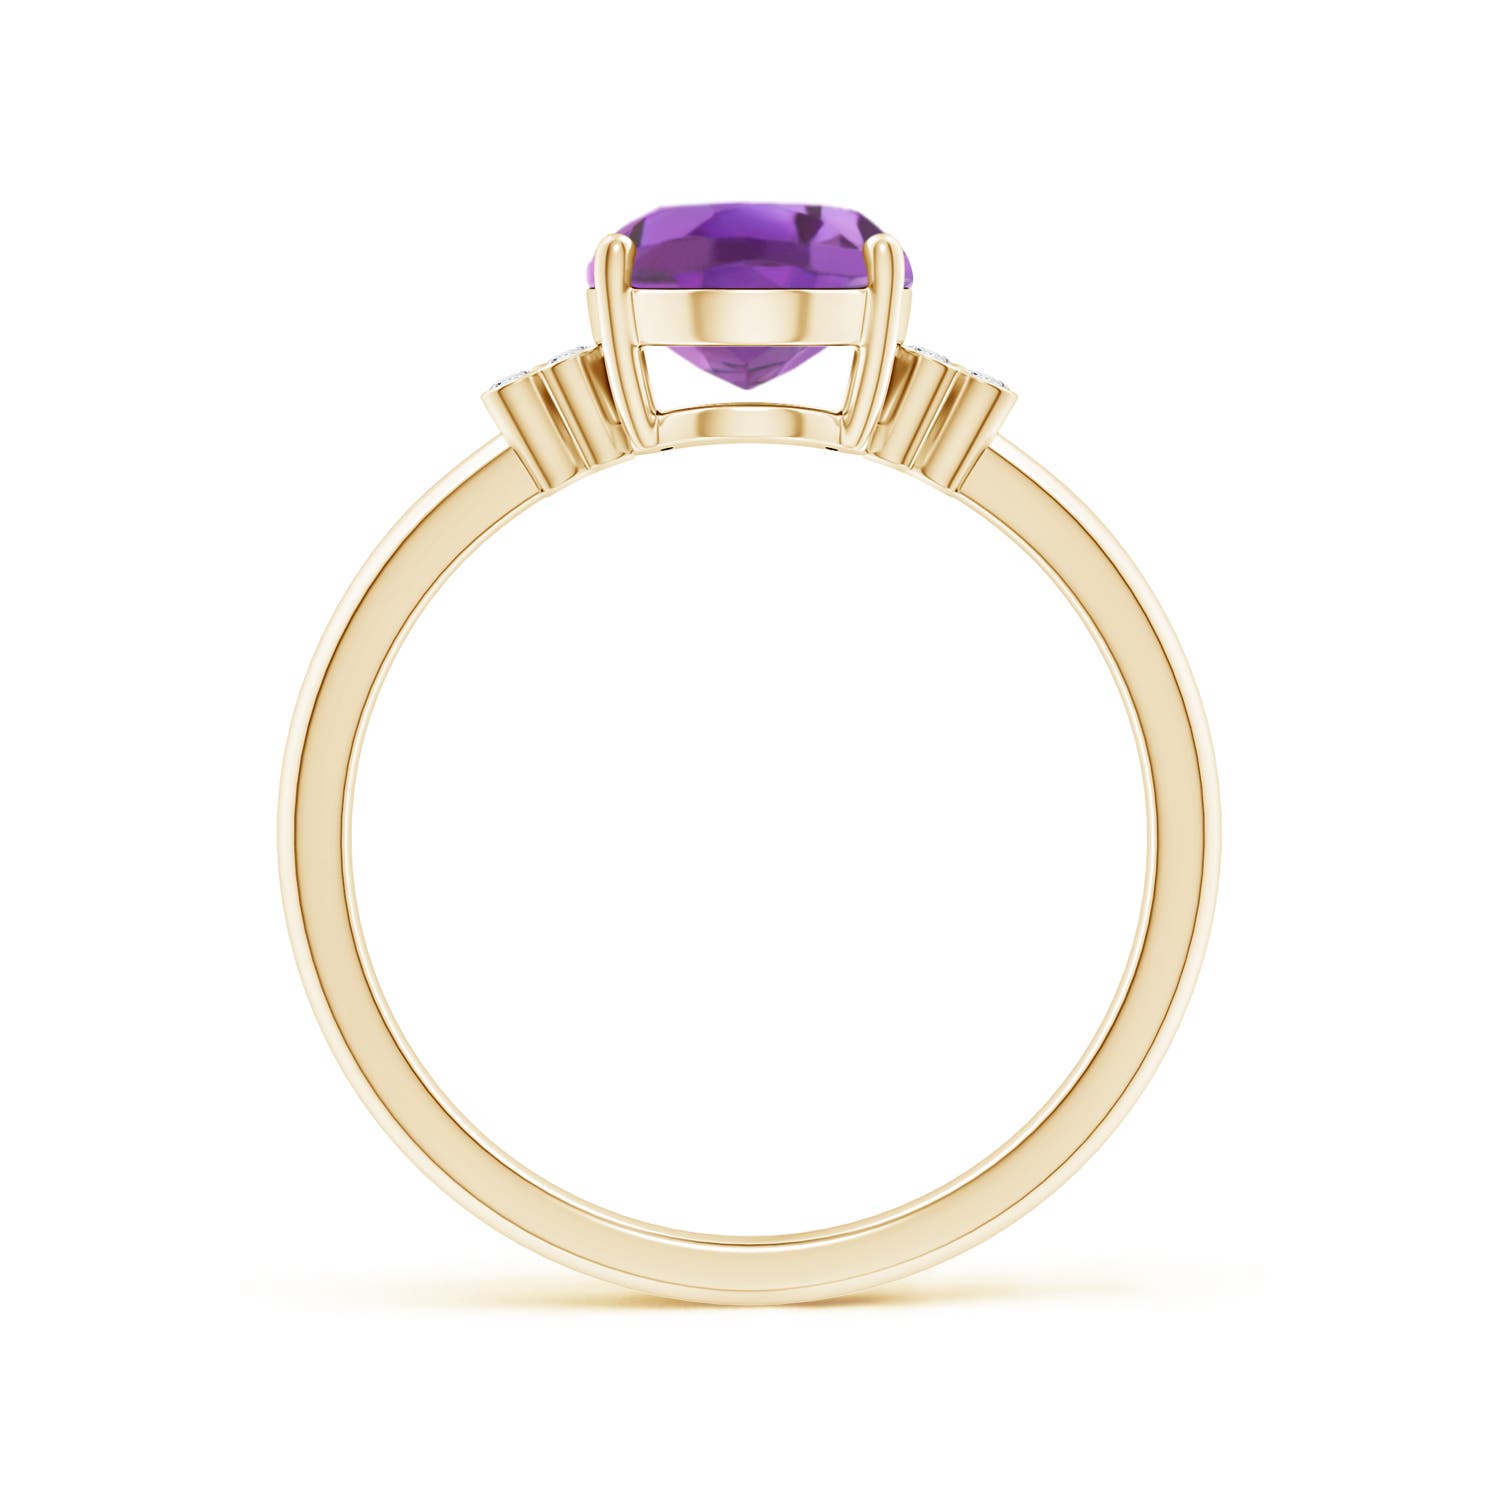 A- Amethyst / 1.66 CT / 14 KT Yellow Gold